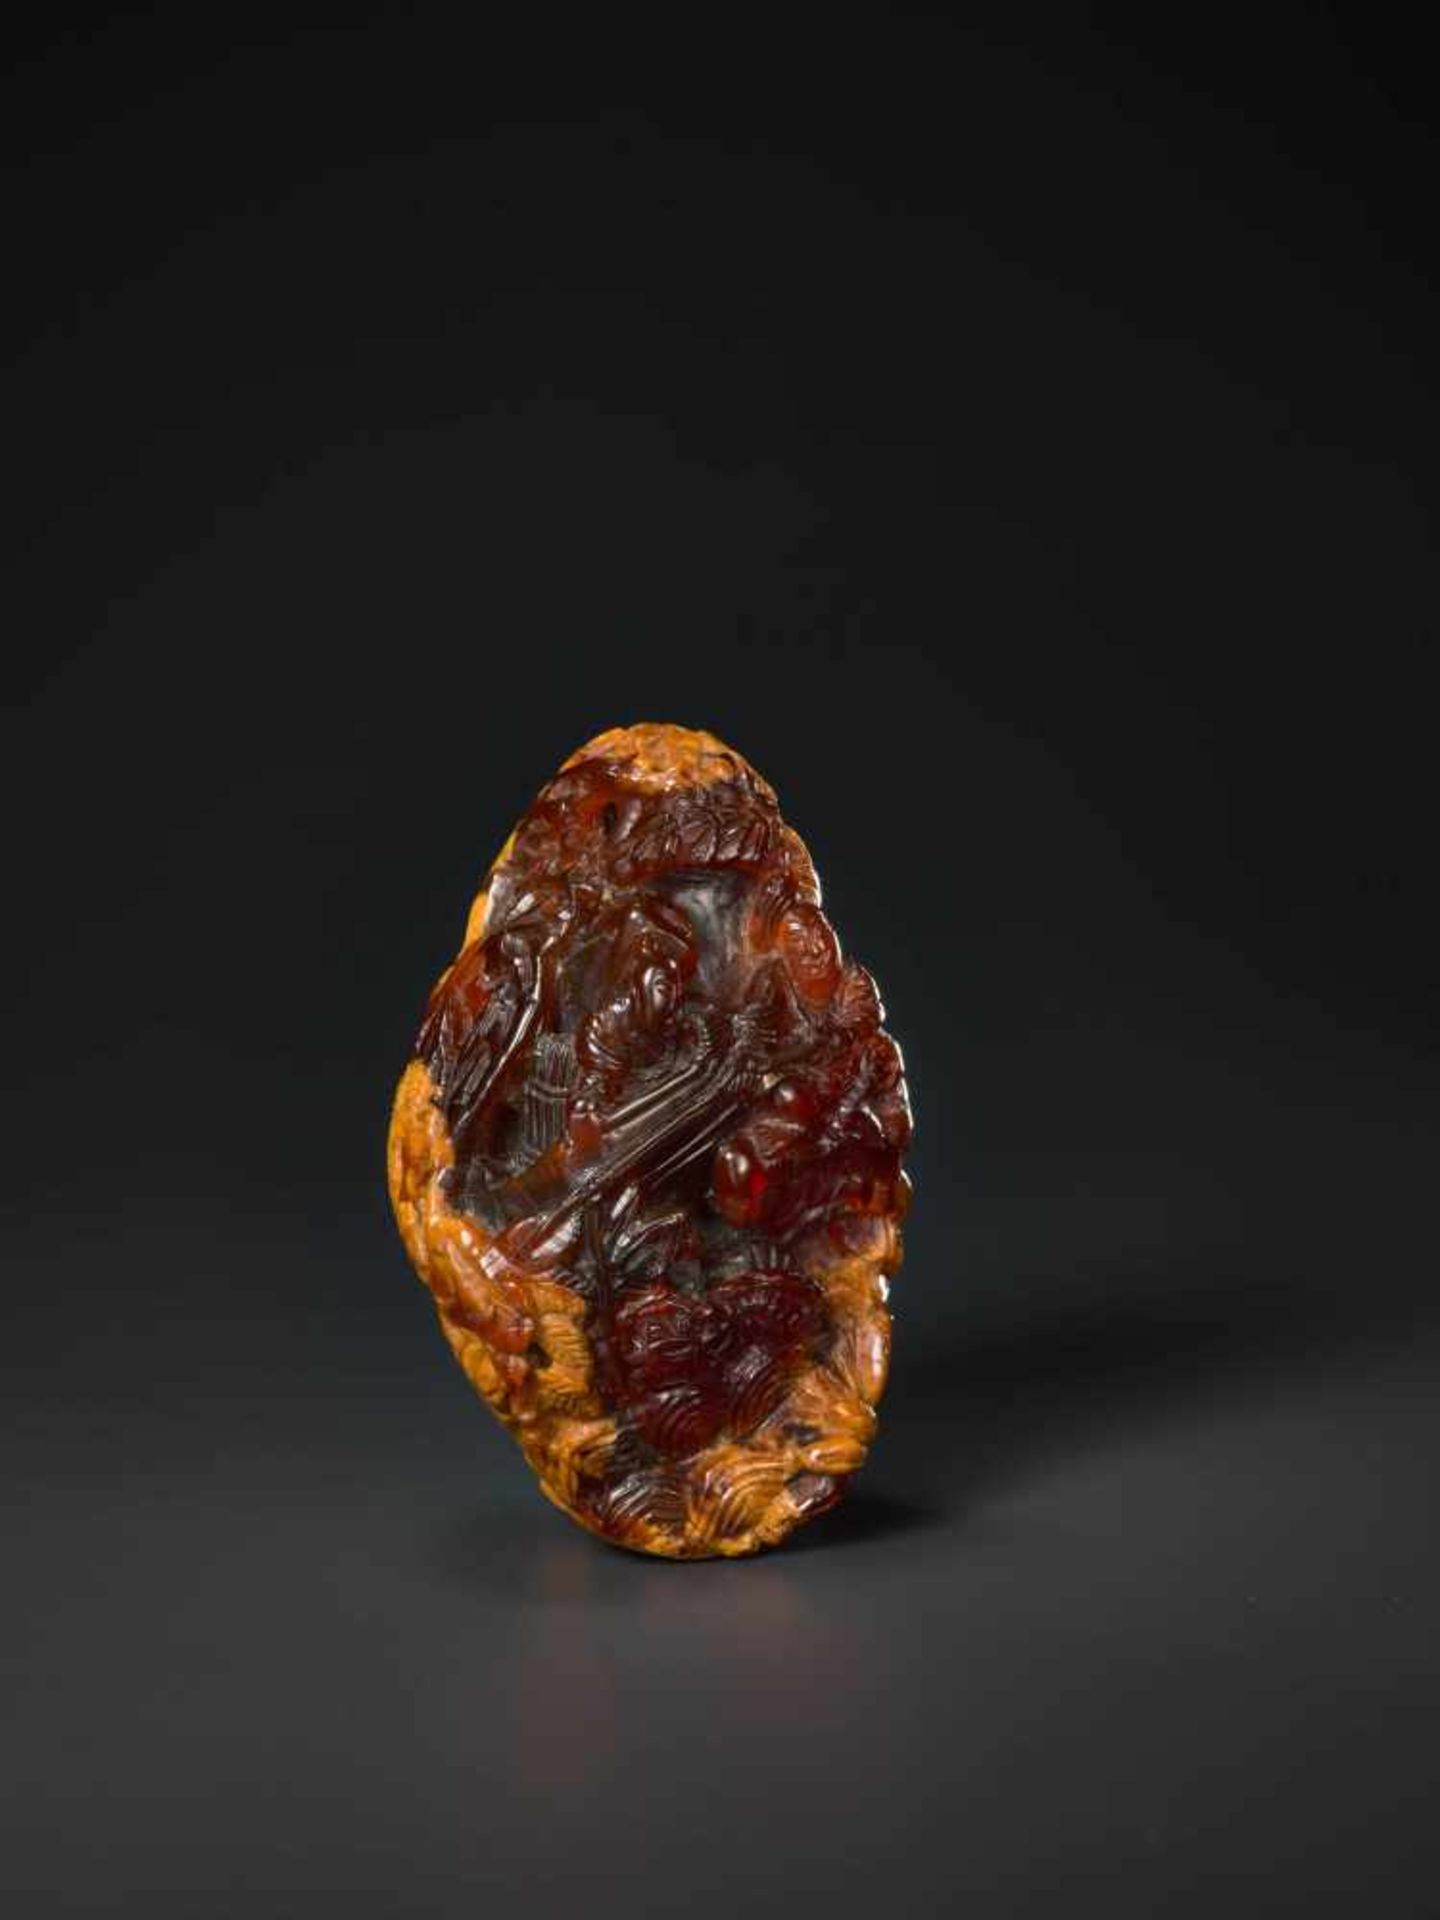 AN 18th CENTURY AMBER PEBBLE CARVING ‘VILLAGE LIFE’ Amber of deep red and caramel color, opaque - Image 2 of 8